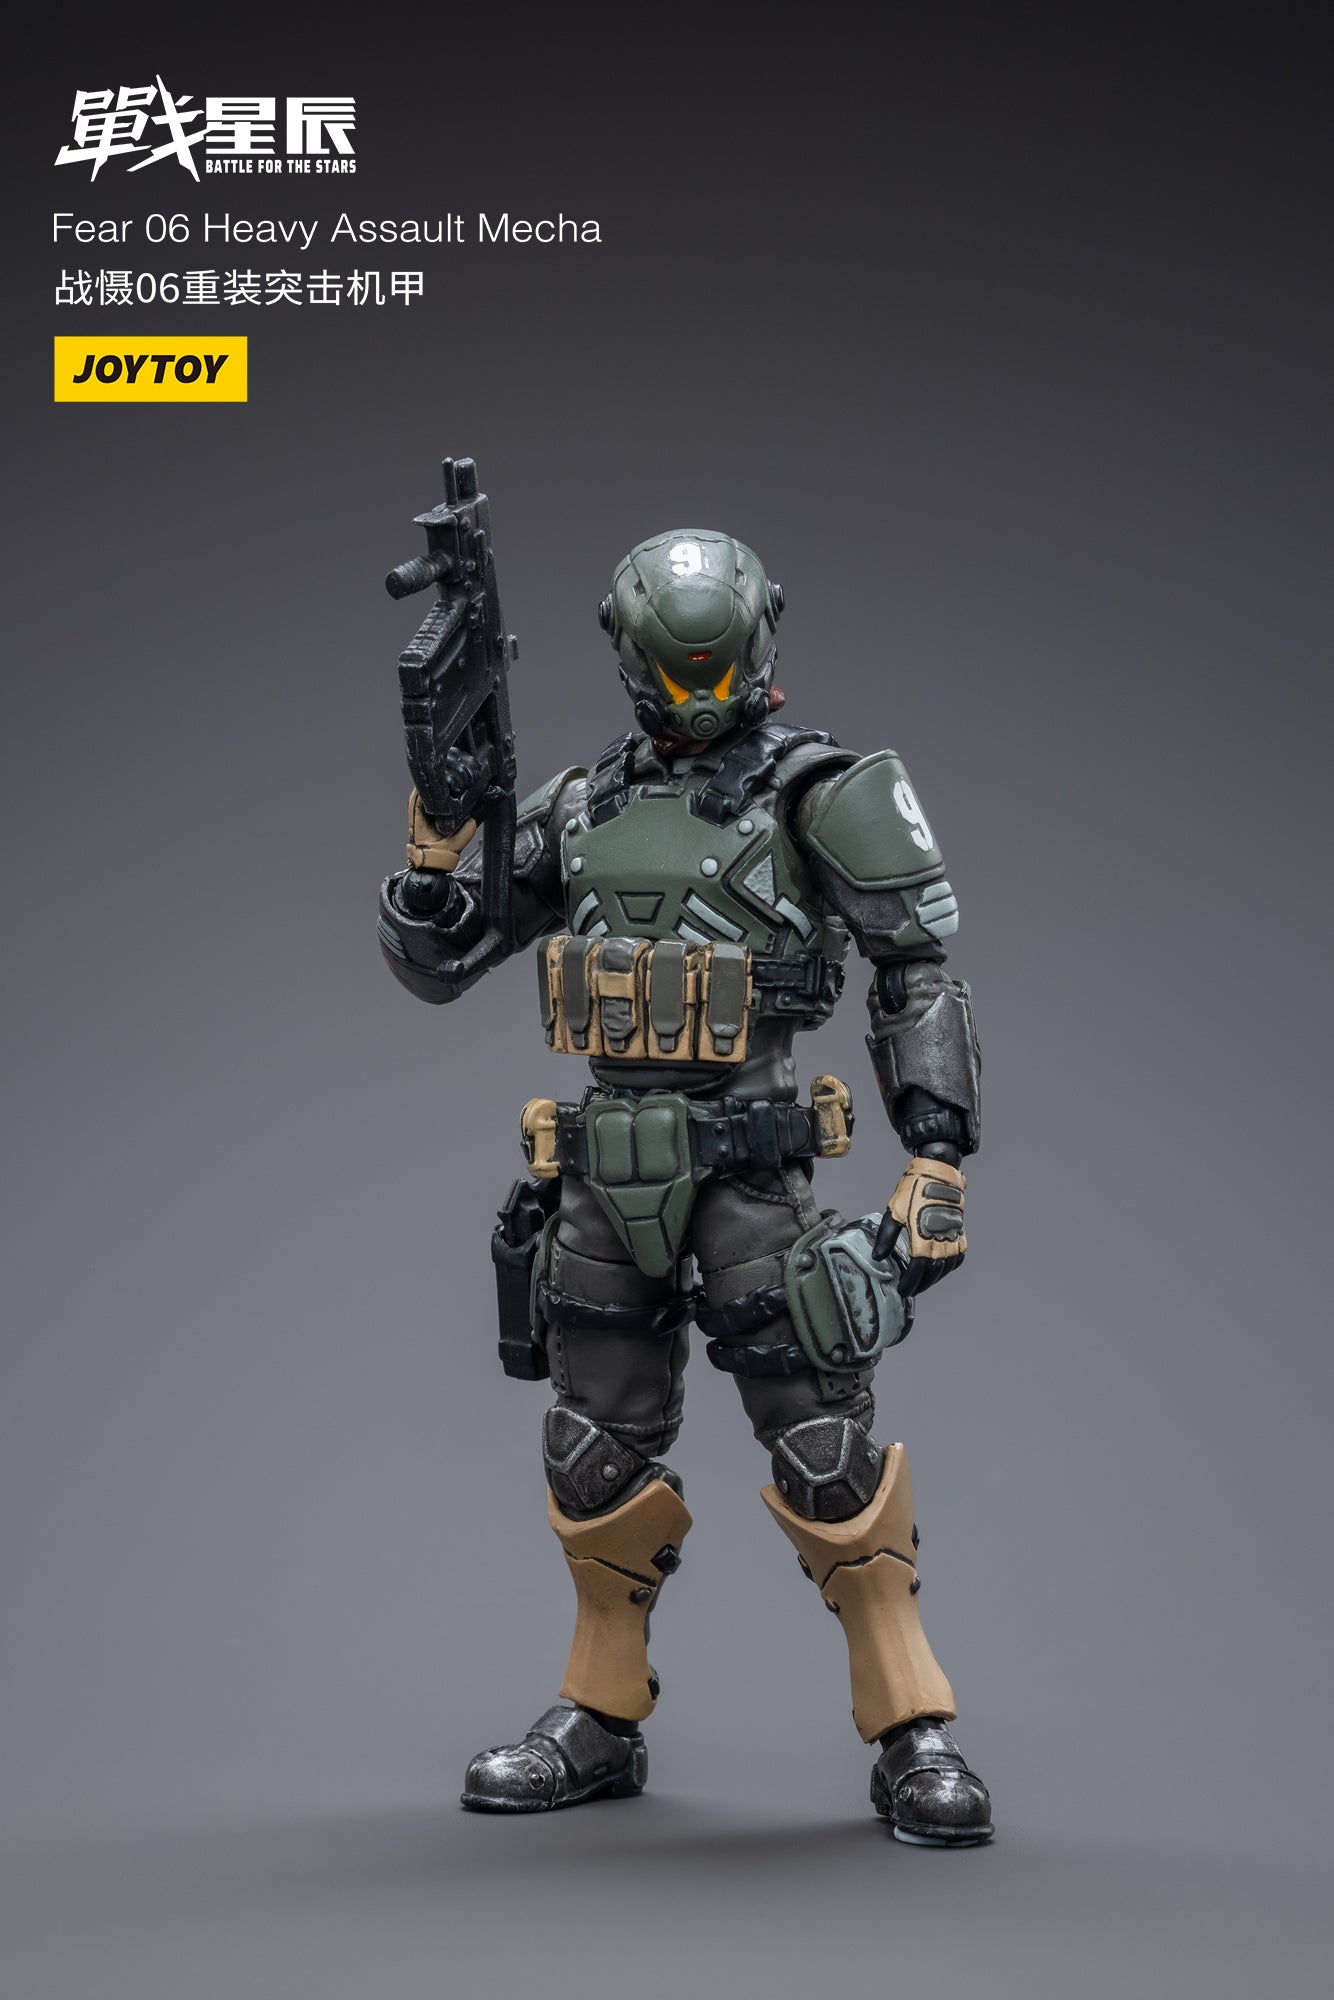 Joy Toy Battle for the Stars FEAR VI (Heavy Assault) With Pilot 1/18 Scale Figure and New Modular Mecha Depot Diorama system/ Maintenance area. JoyToy, each 1/18 scale articulated military mech and pilot features intricate details on a small scale and comes with equally-sized weapons and accessories.